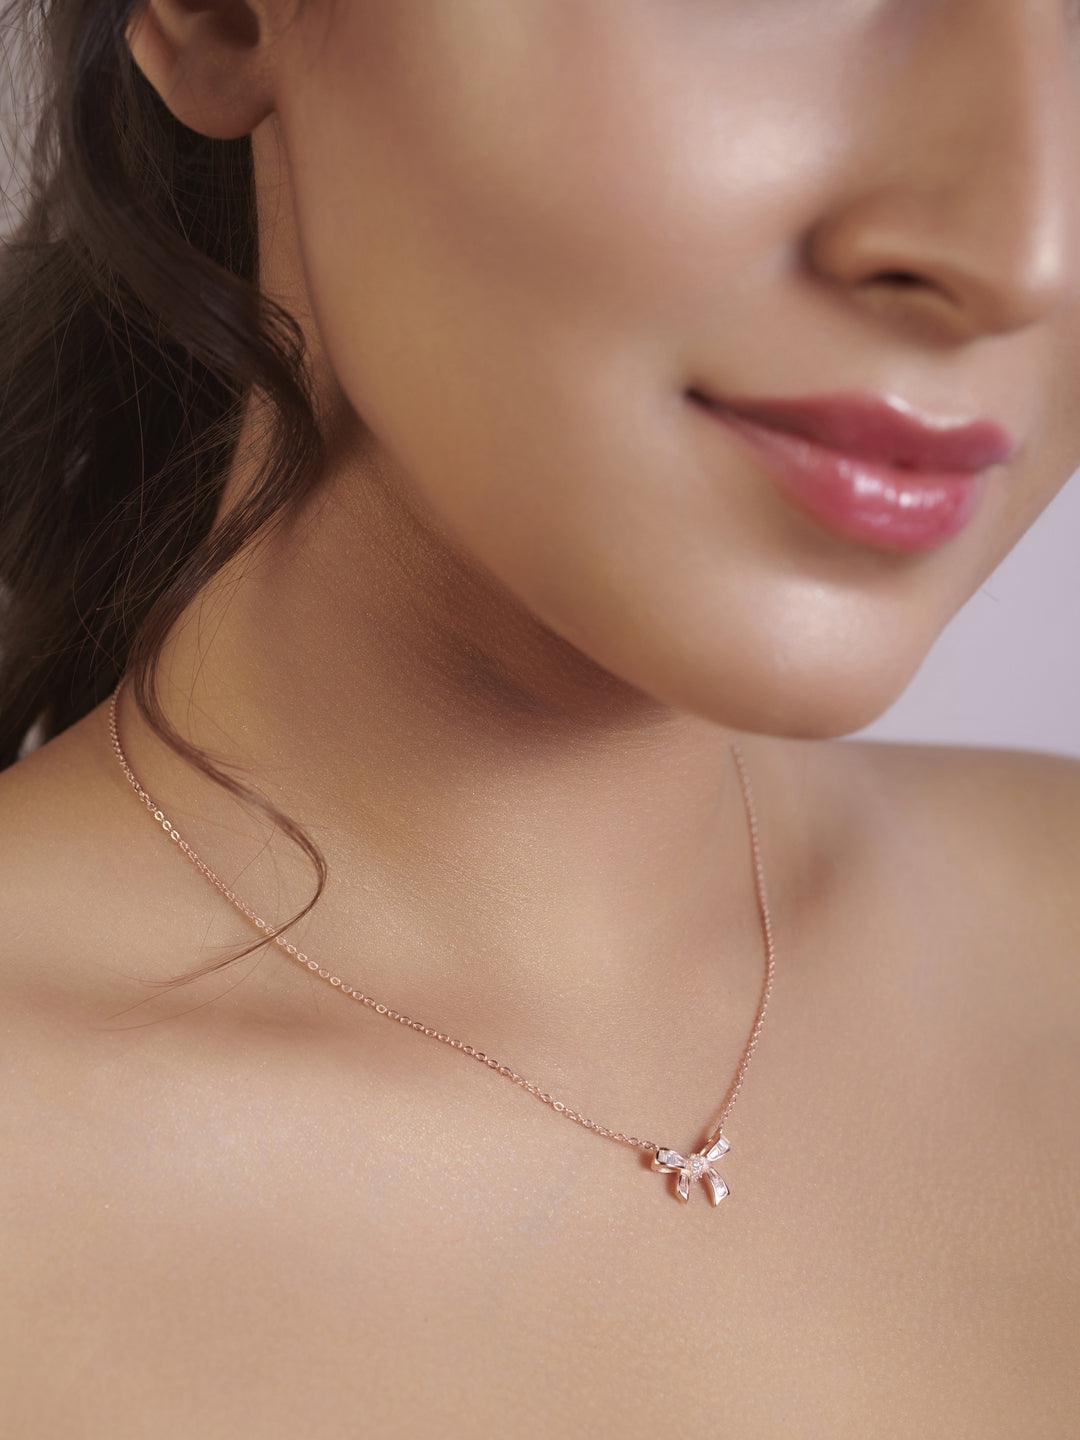 Knot of Love Rose Gold Plated Pure Silver Necklace - Curio Cottage Knot of Love Rose Gold Plated Pure Silver Necklace